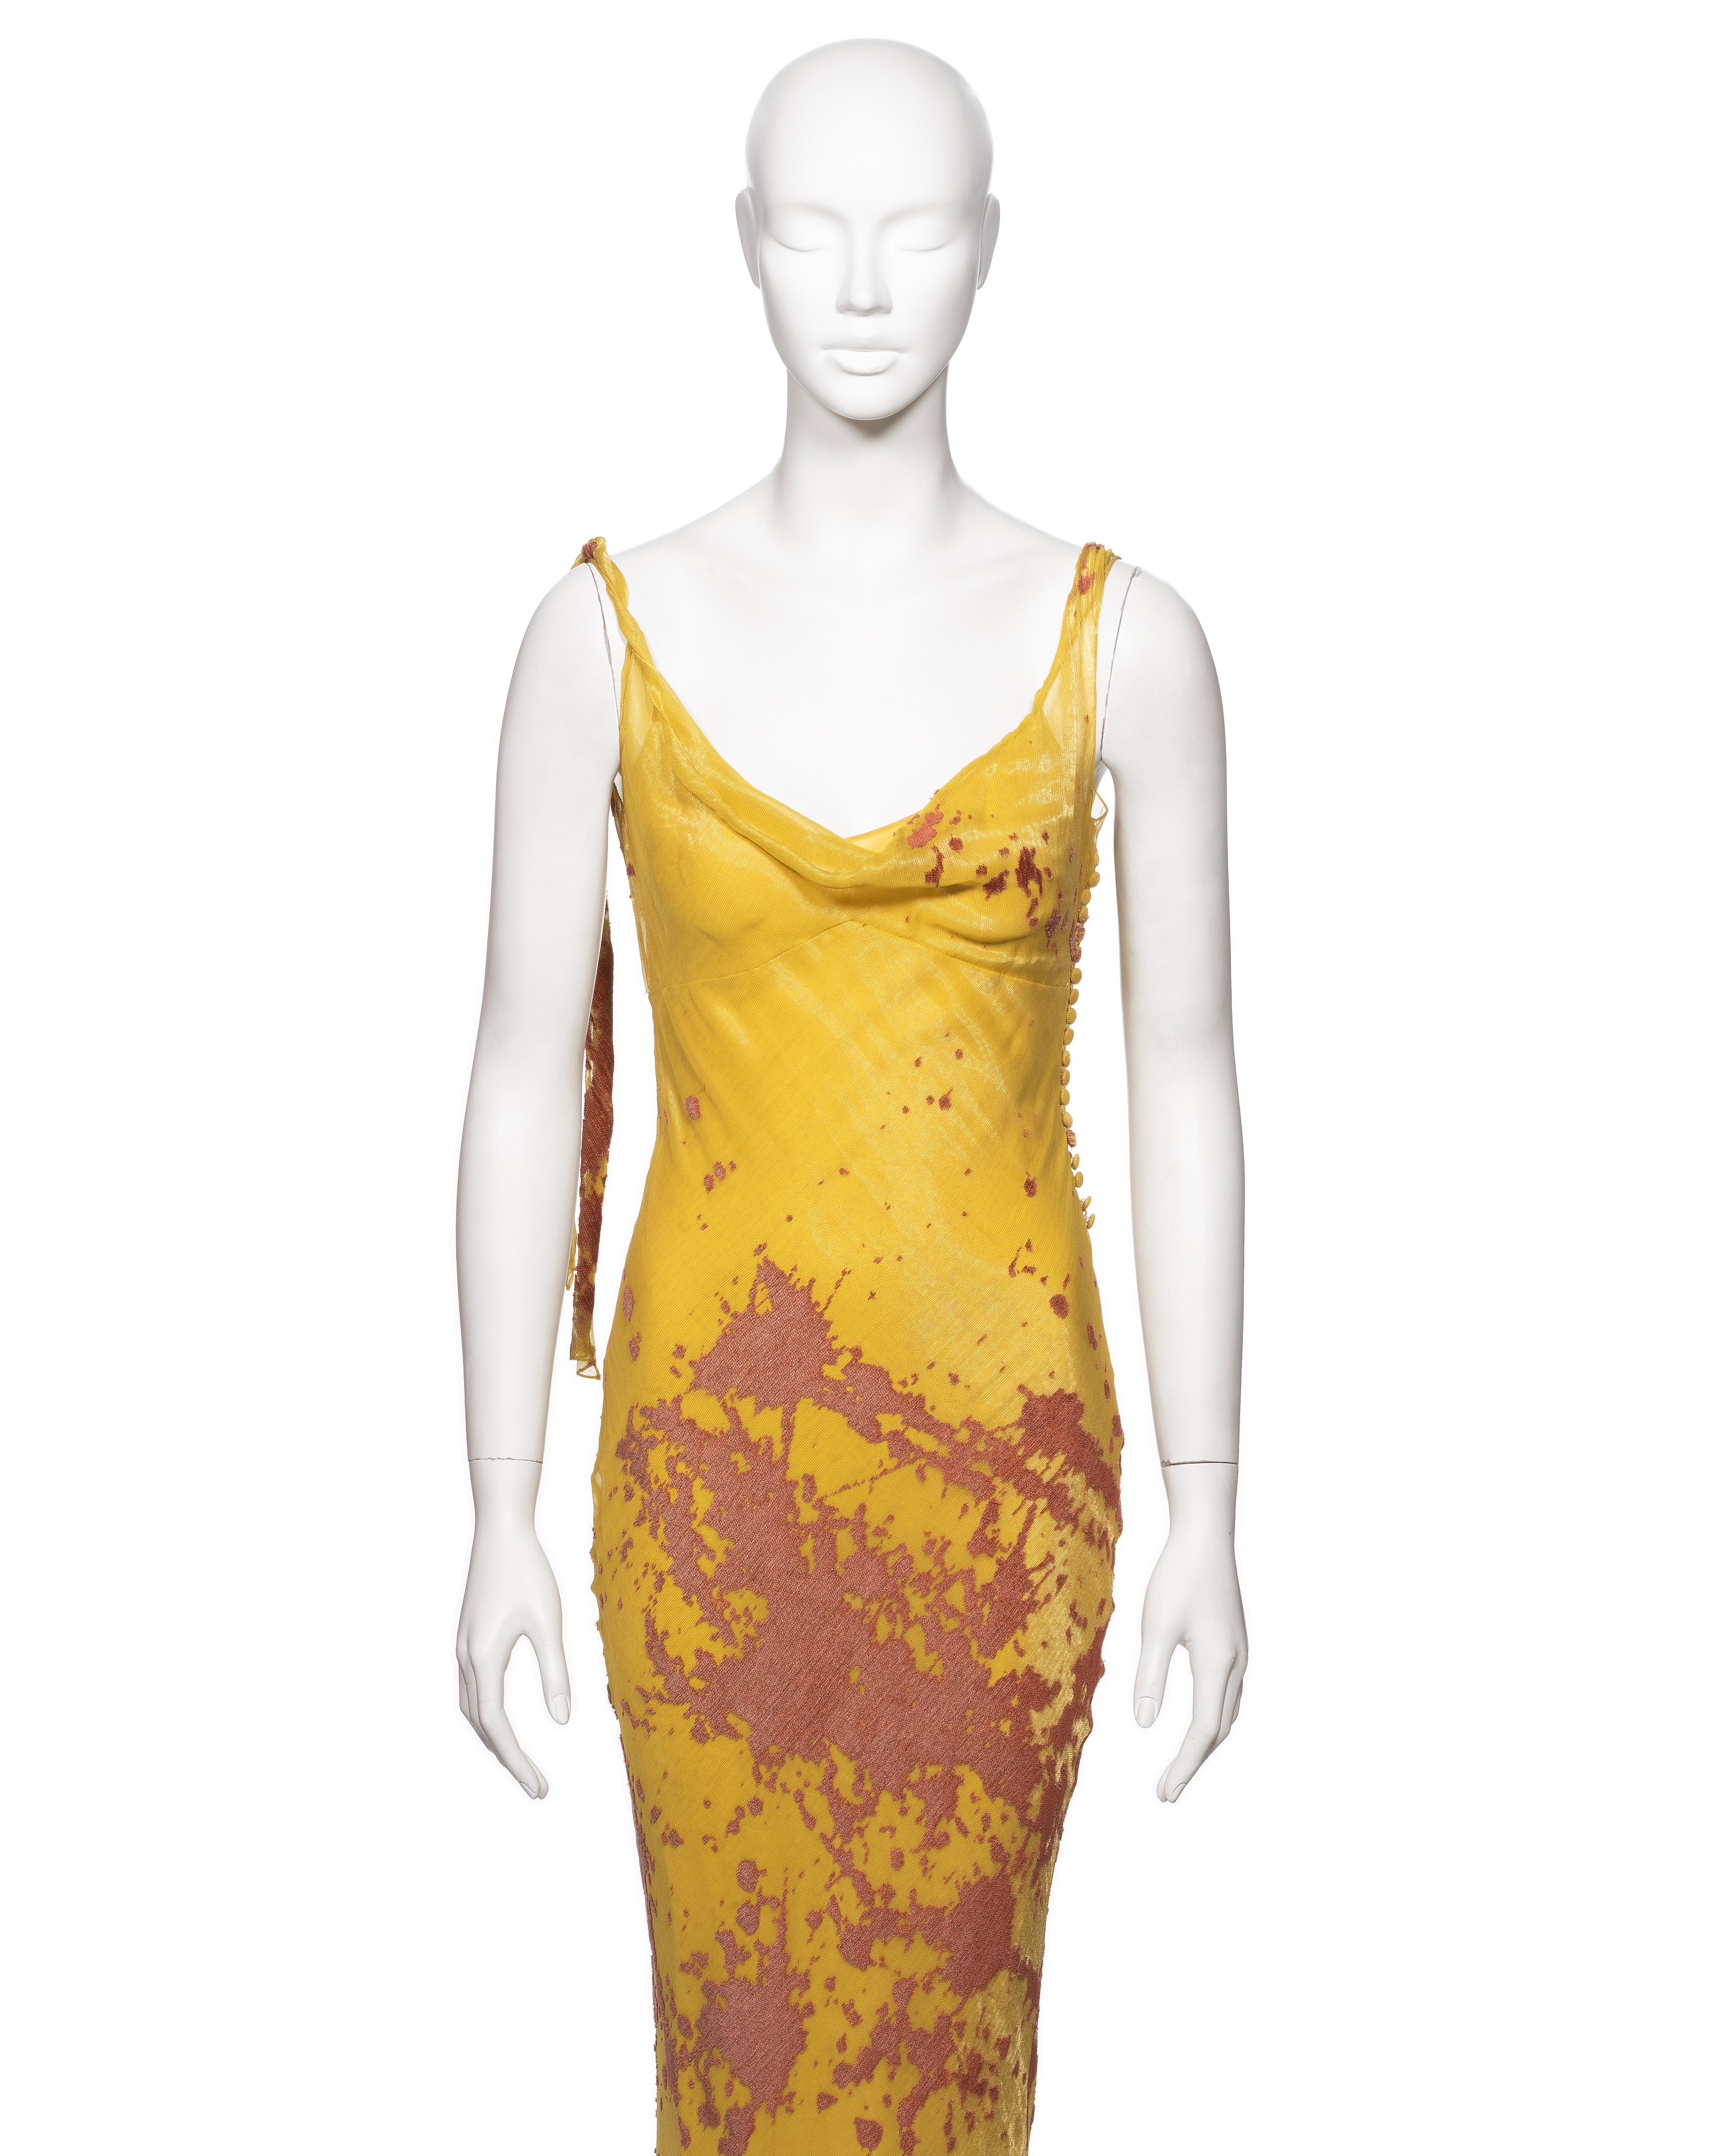 John Galliano Metallic Yellow and Peach Lamé and Silk Evening Dress, FW 2000 In Good Condition For Sale In London, GB